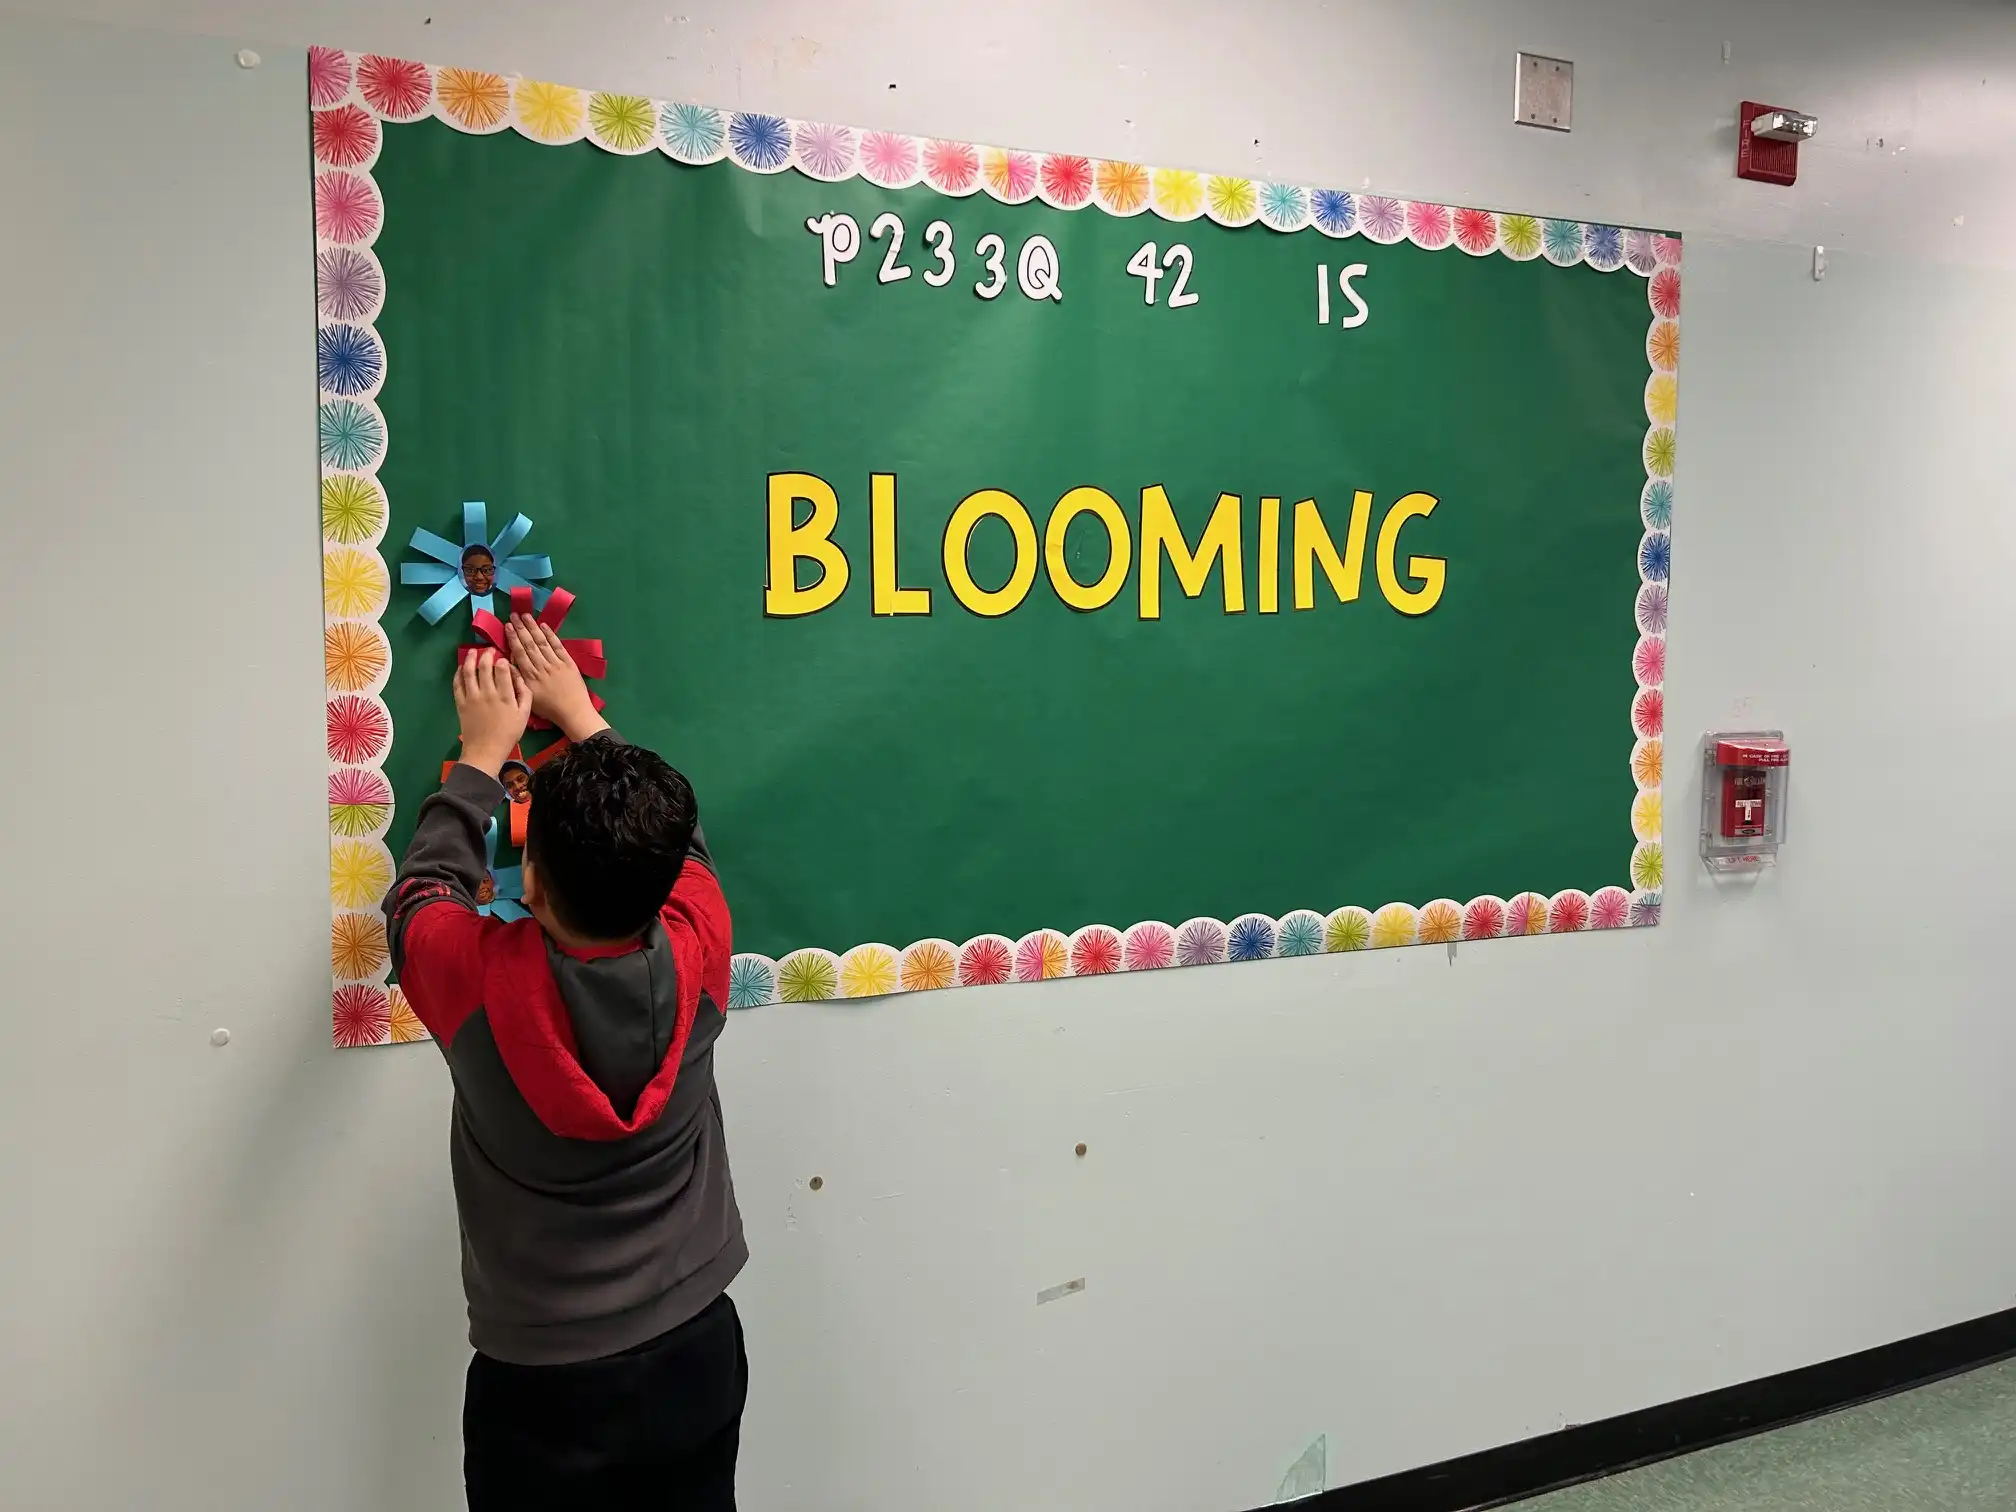 Student putting up paper flowers on a green bulletin board